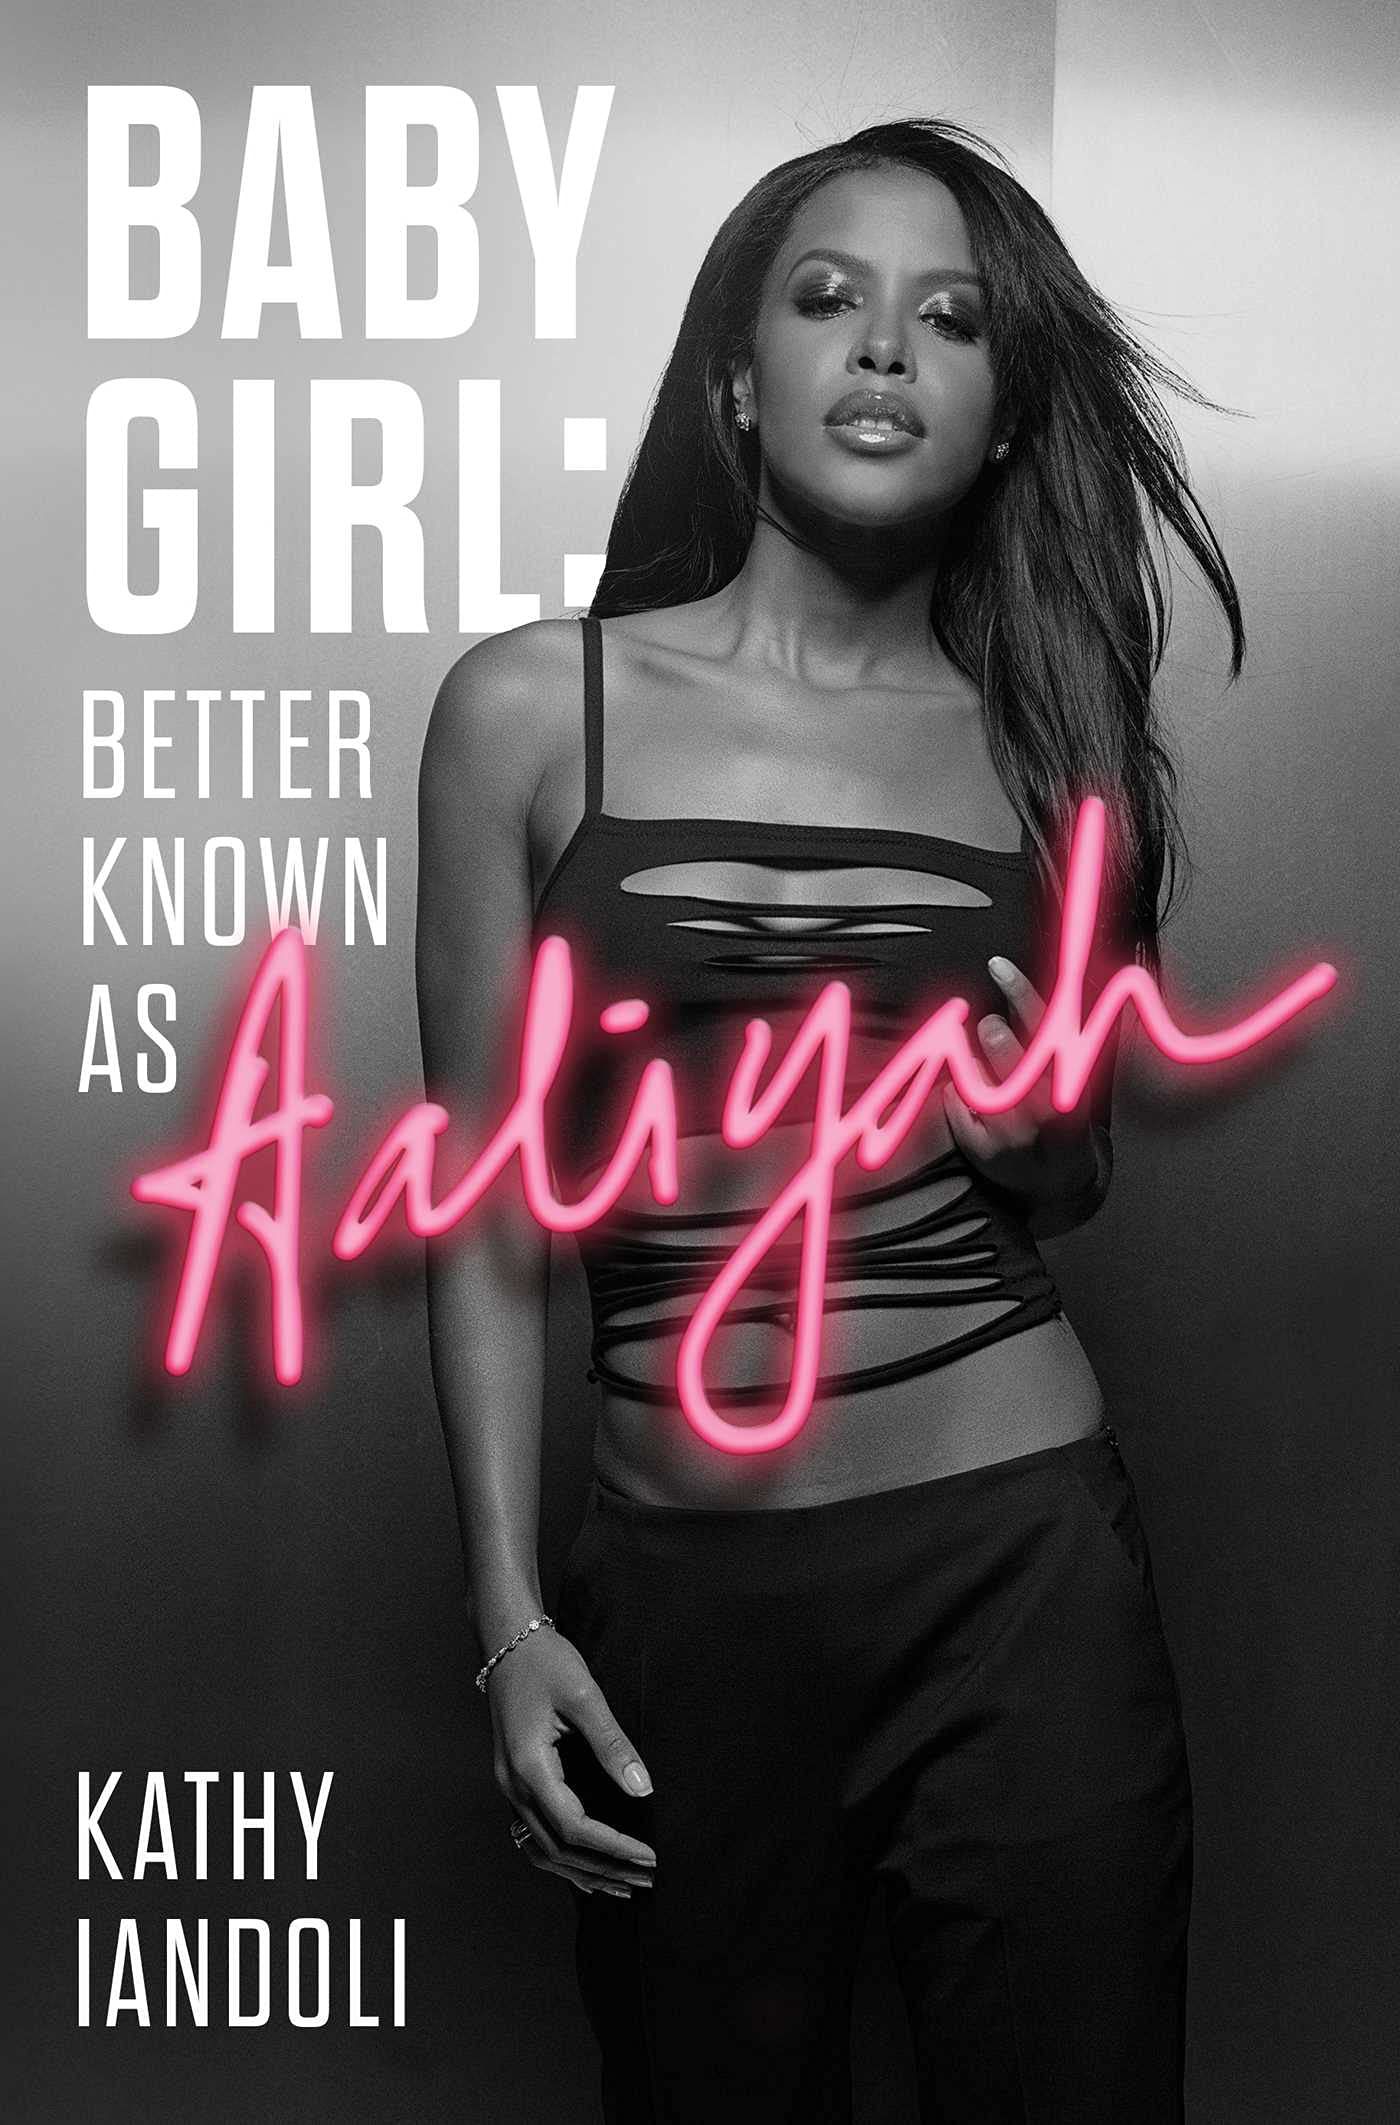 baby Girl Better Known As Aaliyah cover